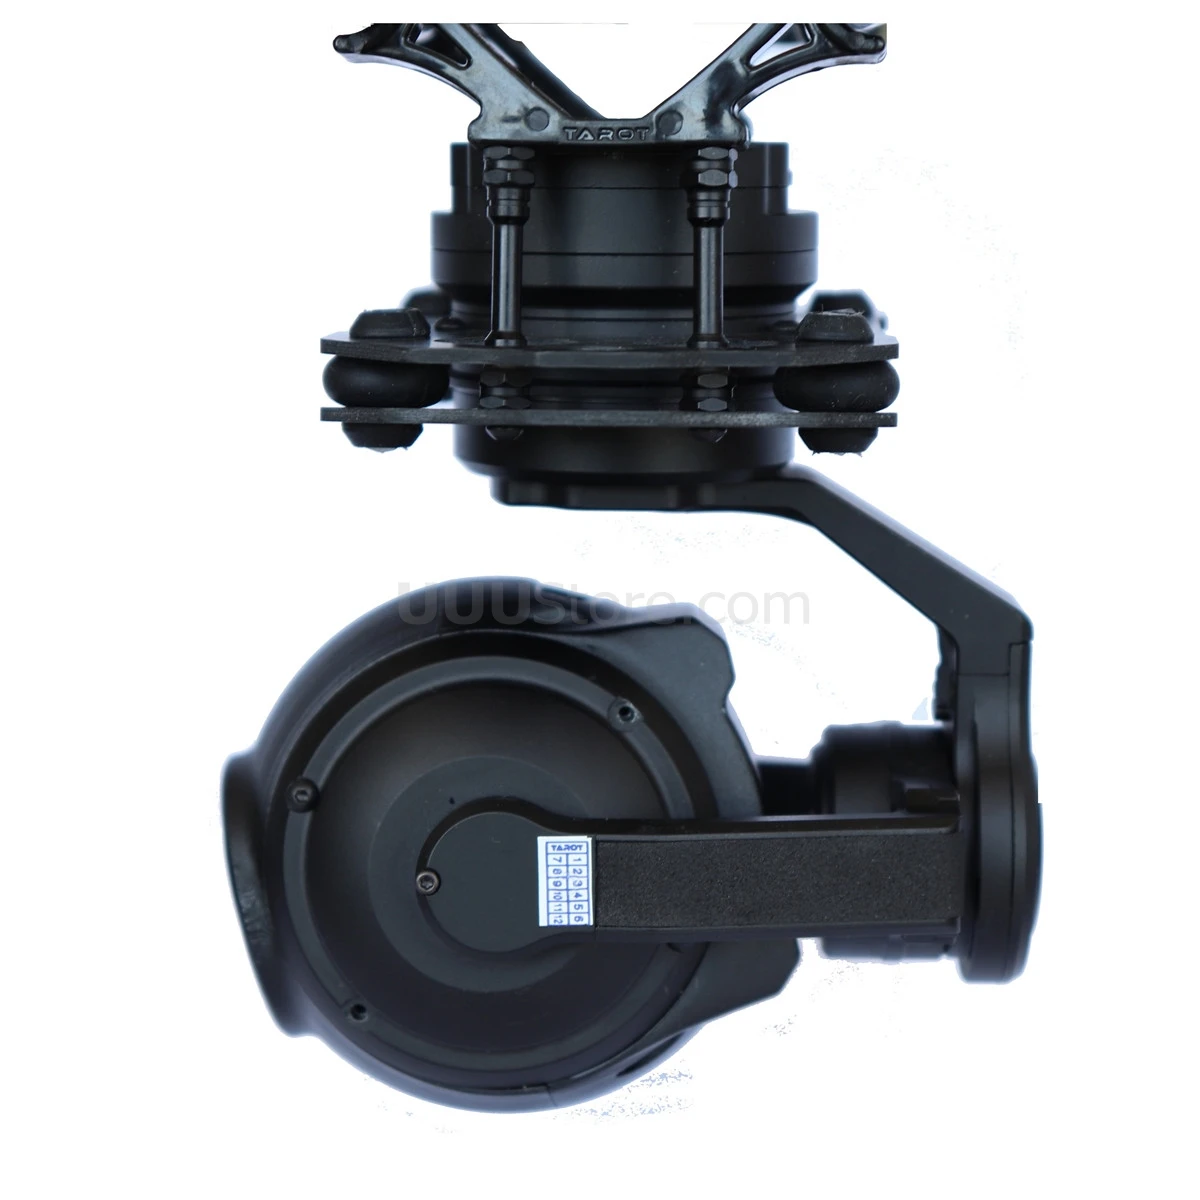 T10X-Pro FPV Spherical 10x optical zoom 1/3 CMOS Camera with 3-axis gimbal upgrade from Tarot PEEPER T10X 2